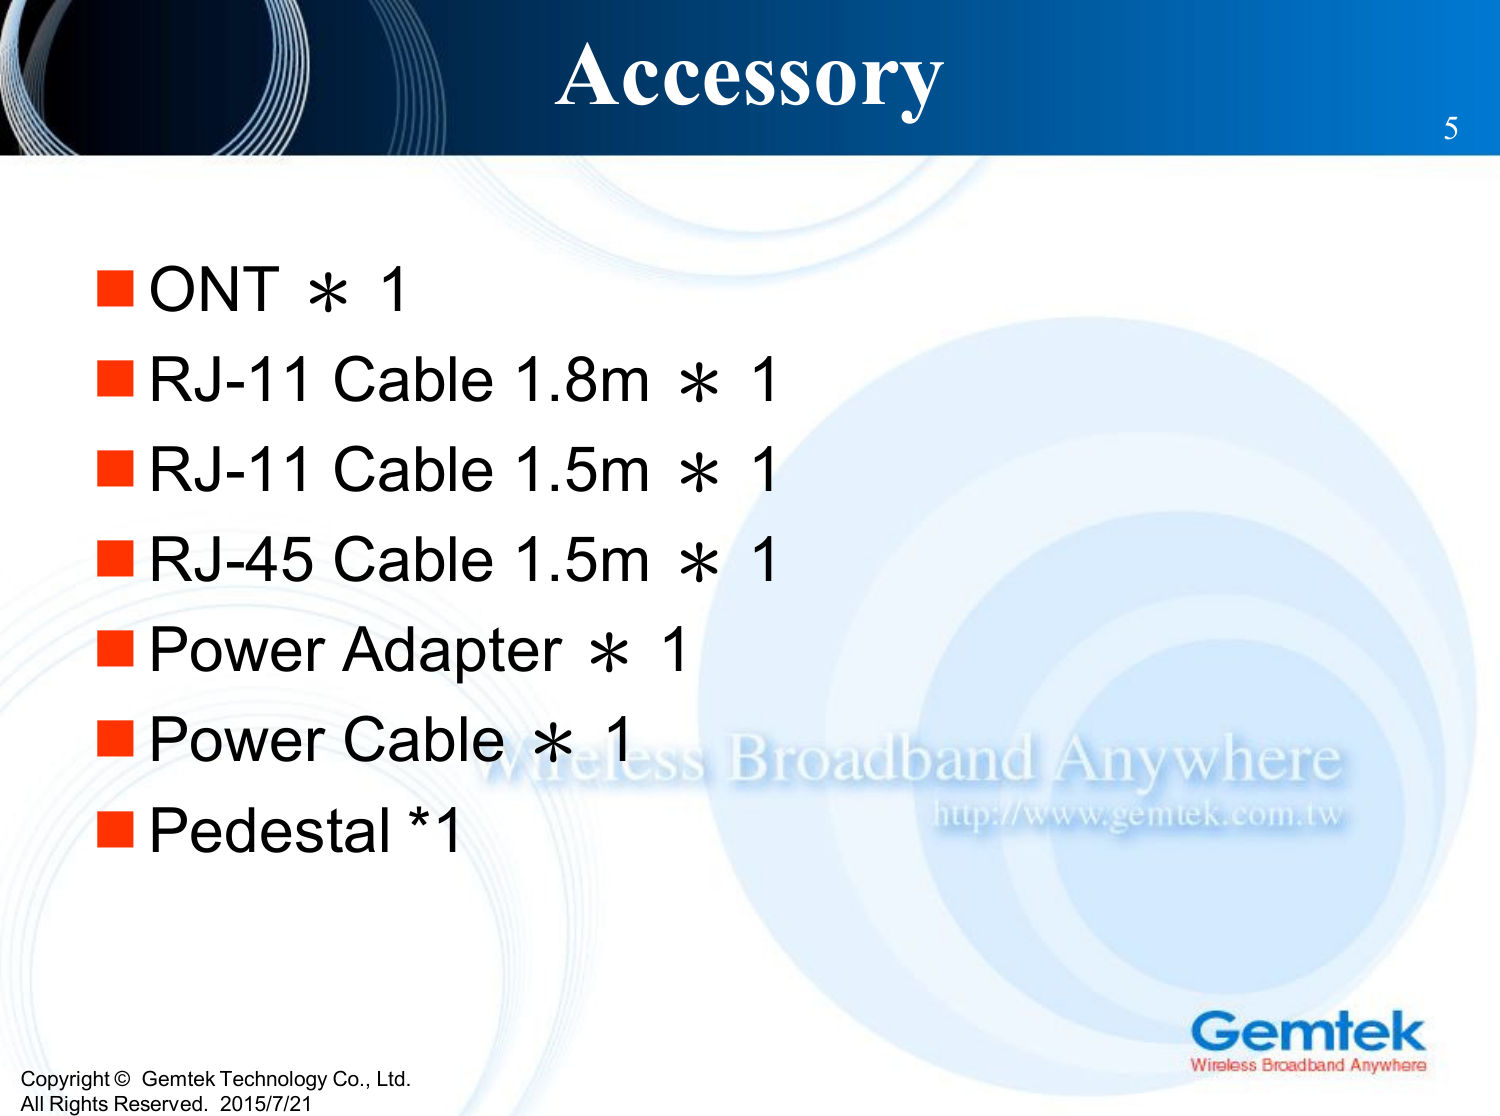 Copyright ©  Gemtek Technology Co., Ltd.All Rights Reserved.  2015/7/21Accessory 5ONT ＊1RJ-11 Cable 1.8m ＊1RJ-11 Cable 1.5m ＊1RJ-45 Cable 1.5m ＊1Power Adapter ＊1Power Cable ＊1Pedestal *1